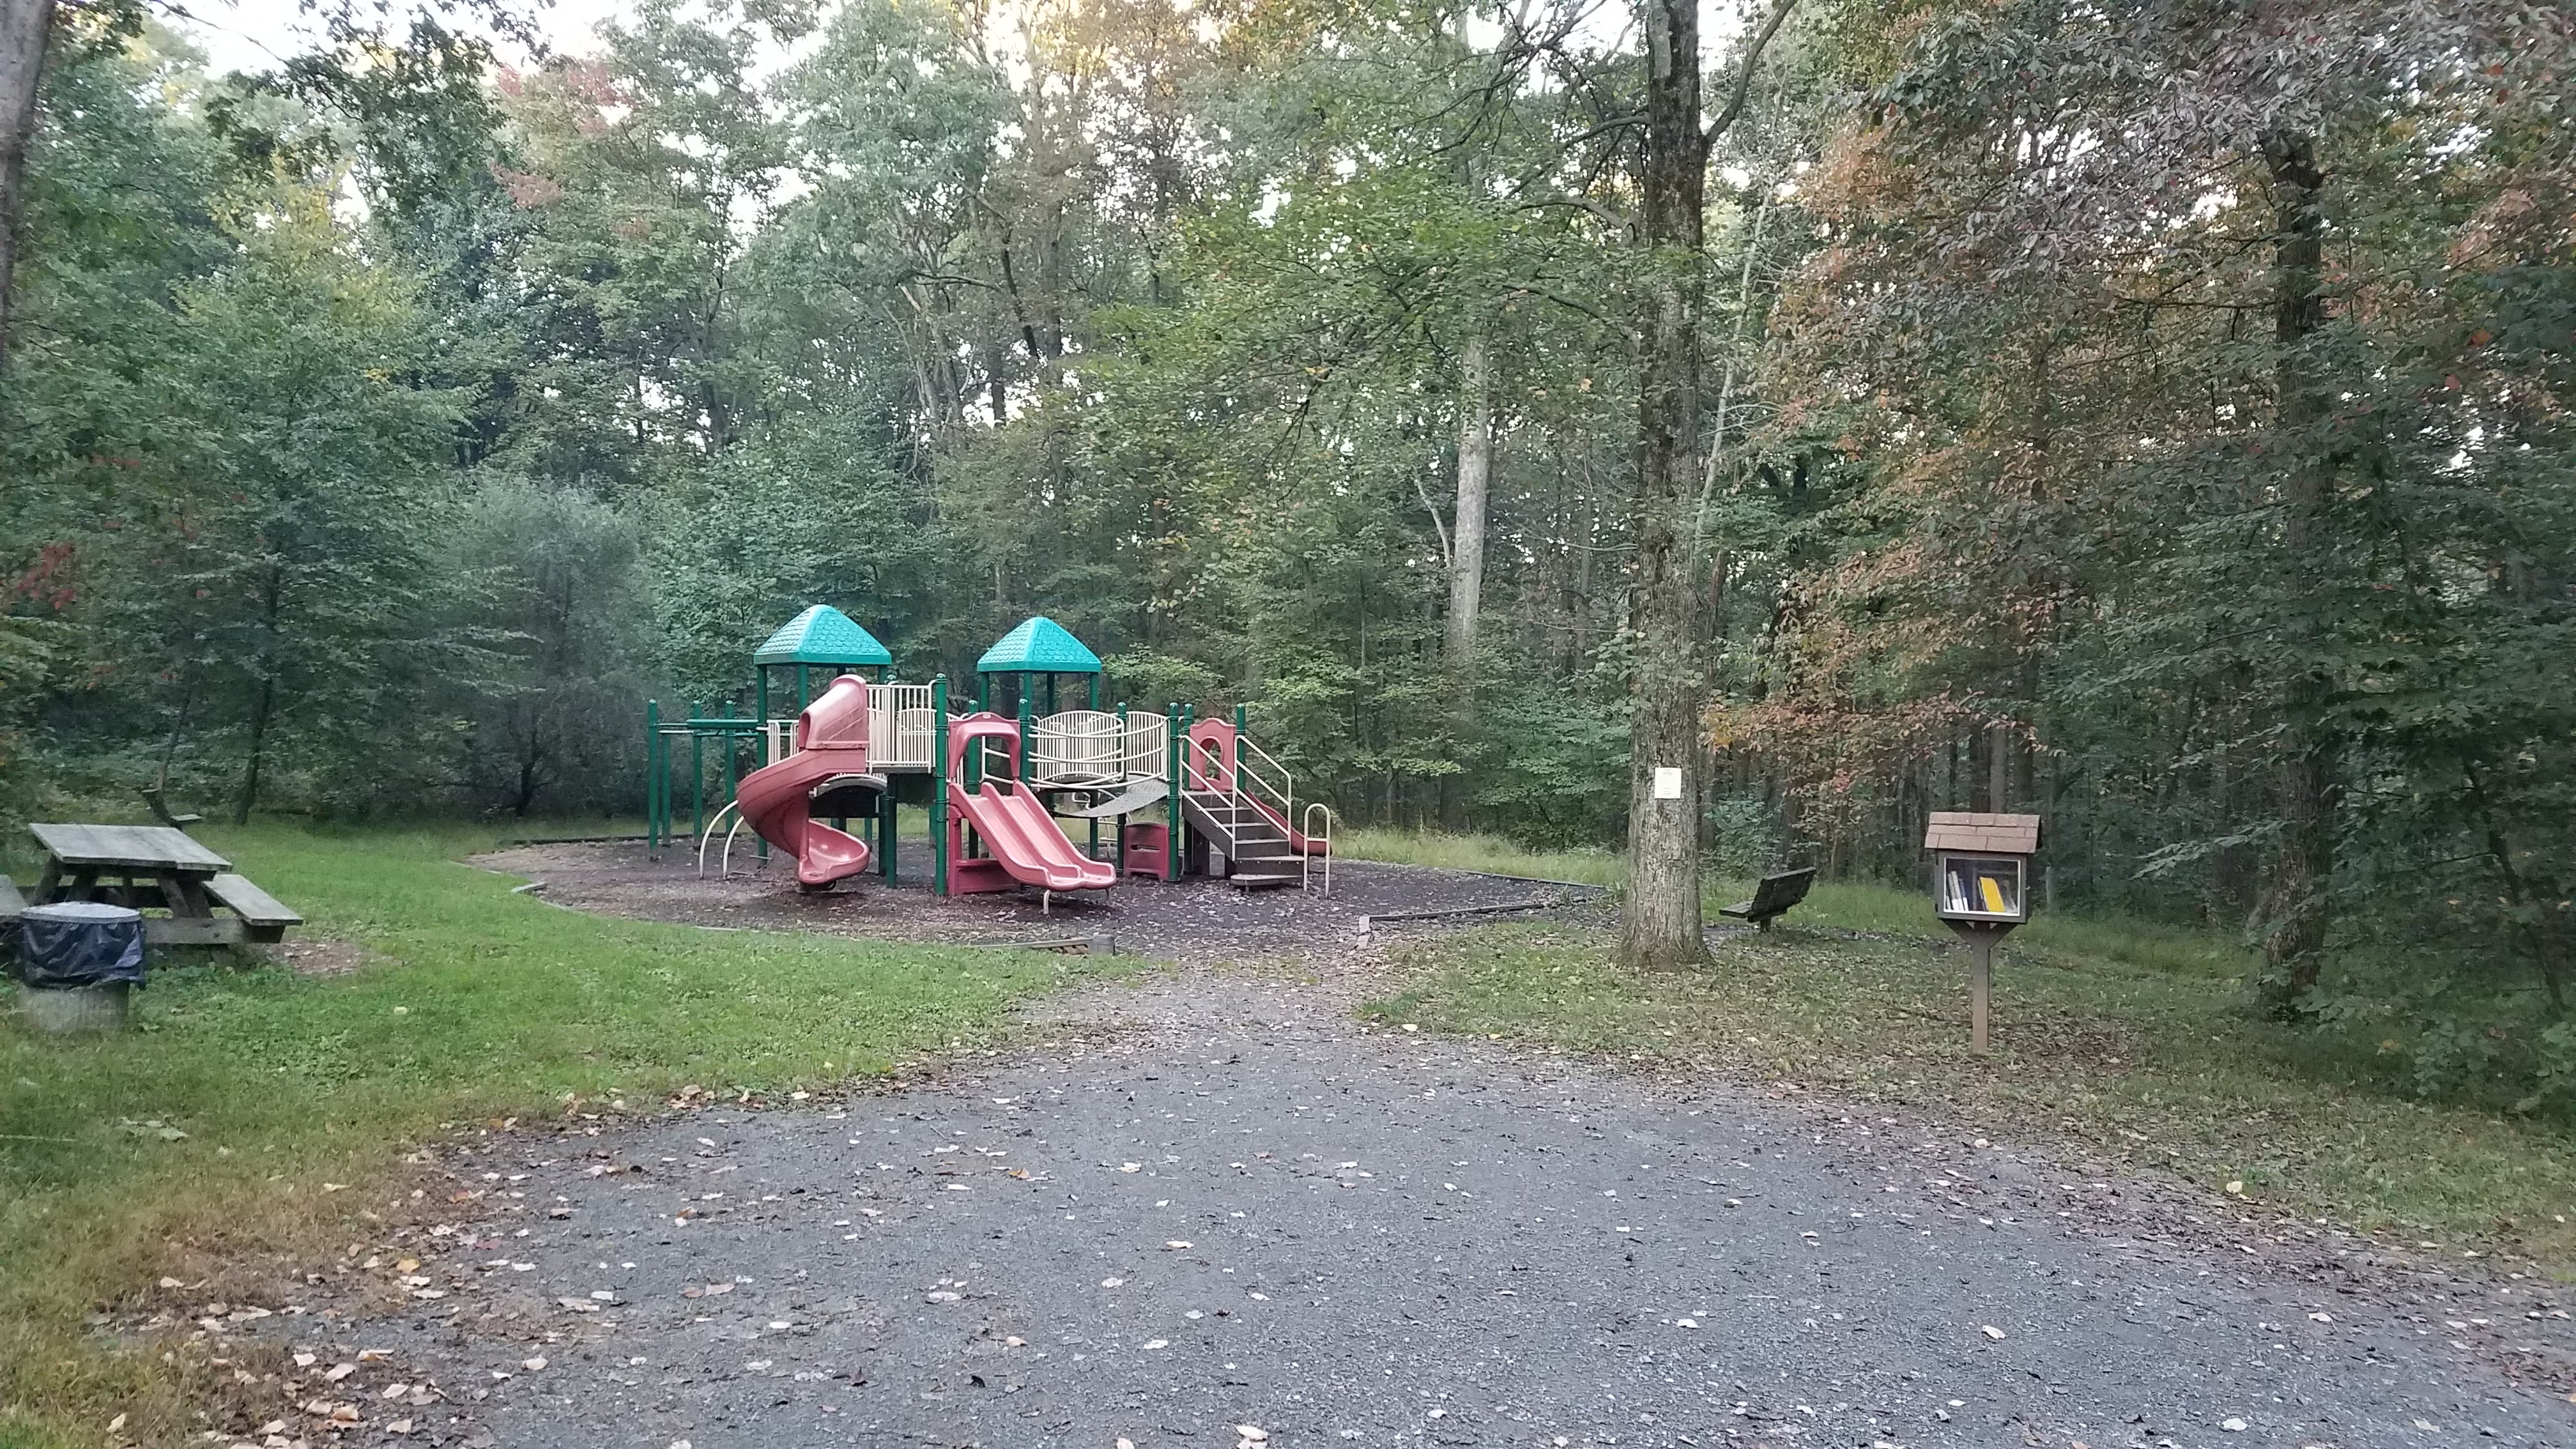 Playground near the entrance to Loop A